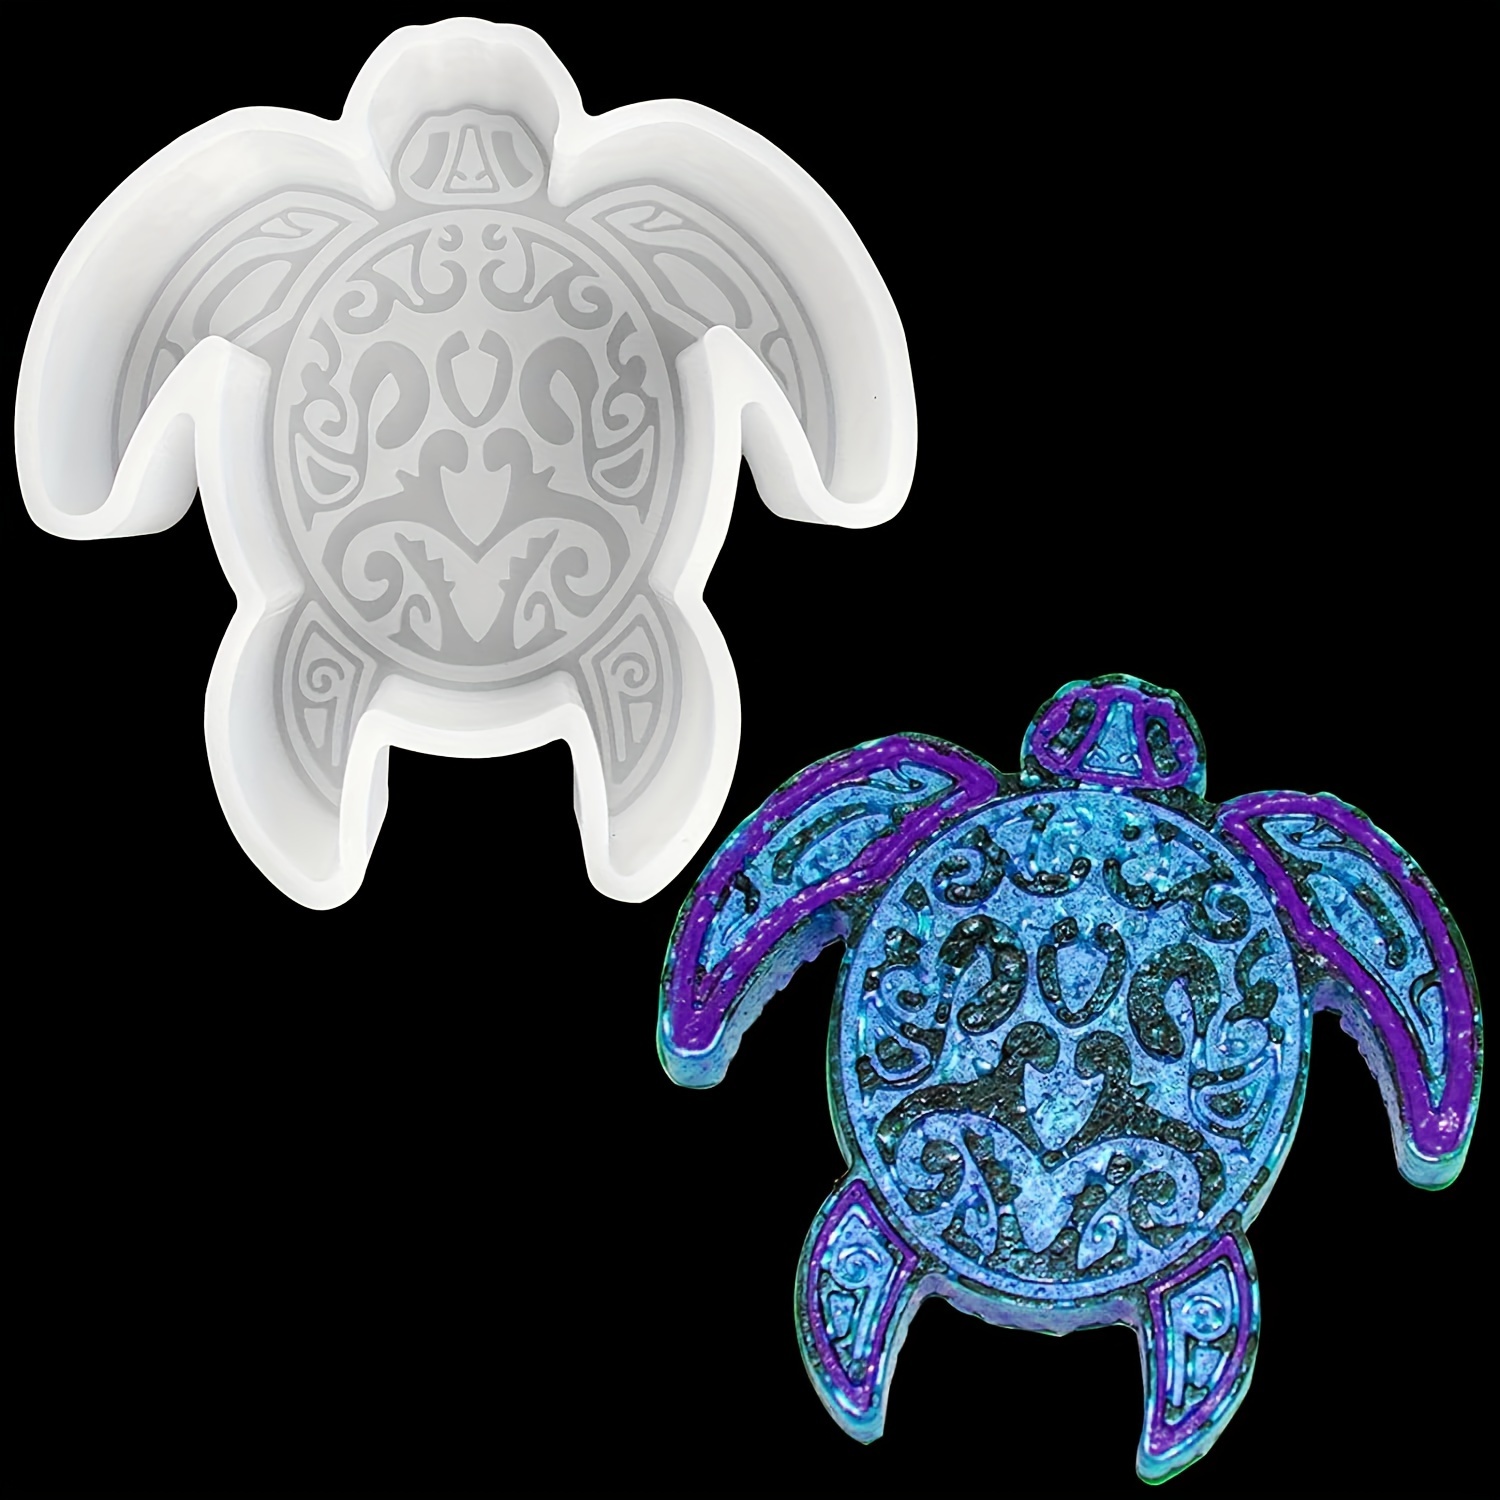 

Sea Turtle Silicone Molds For Freshies, Sea Turtle Car Freshie Mold Car Freshies Supplies Molds Silicone Oven Safe Making Kit For Freshies Resin Soap Candles